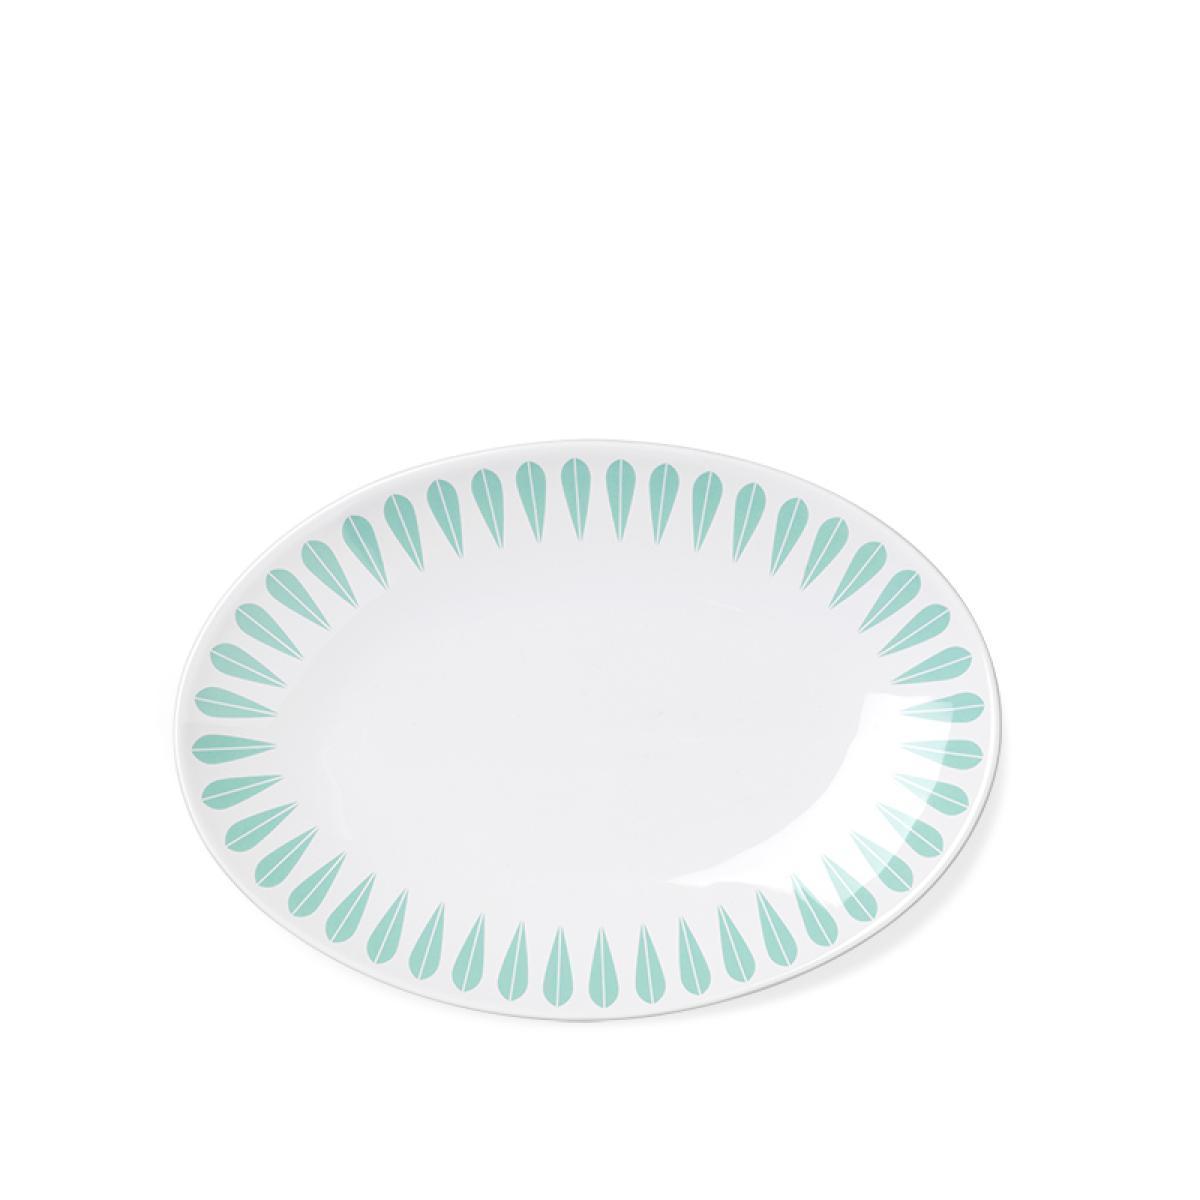 Lucie Kaas Arne Clausen Collection Serving Plate Mint Green, 29 cm